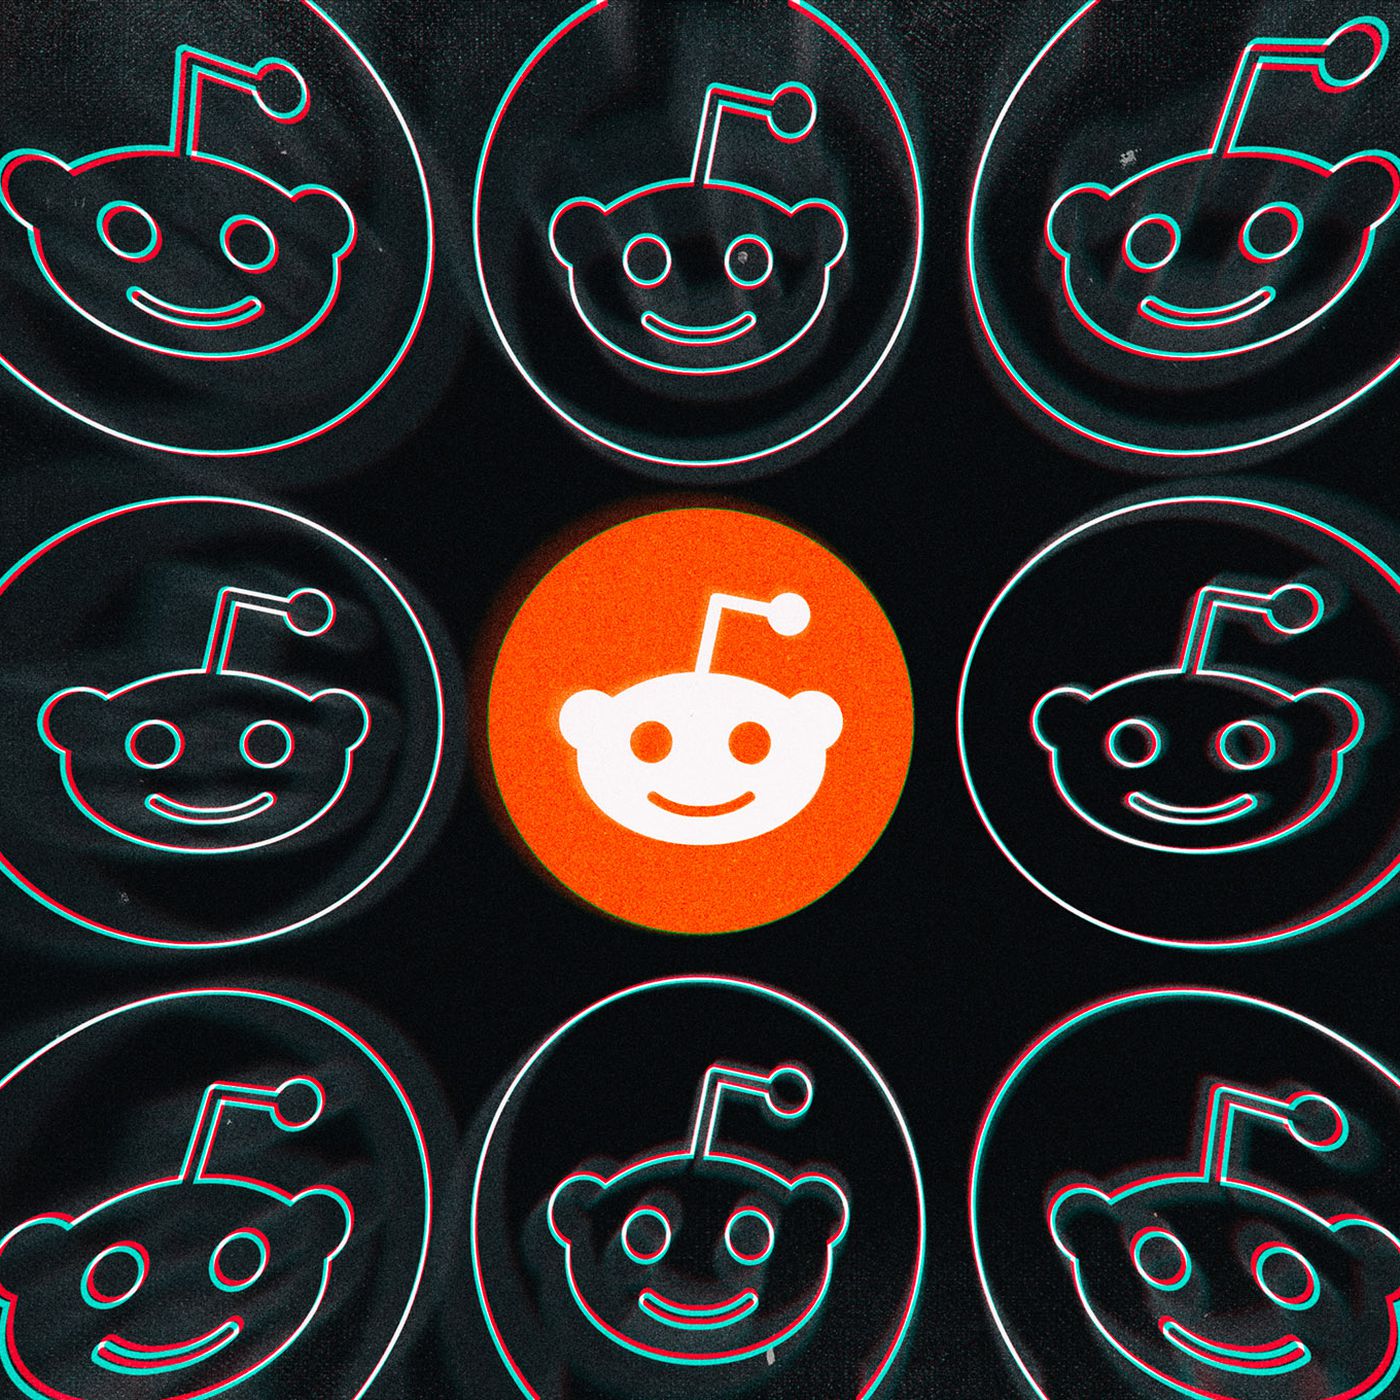 Reddit seems to be back after crashing as GME soared